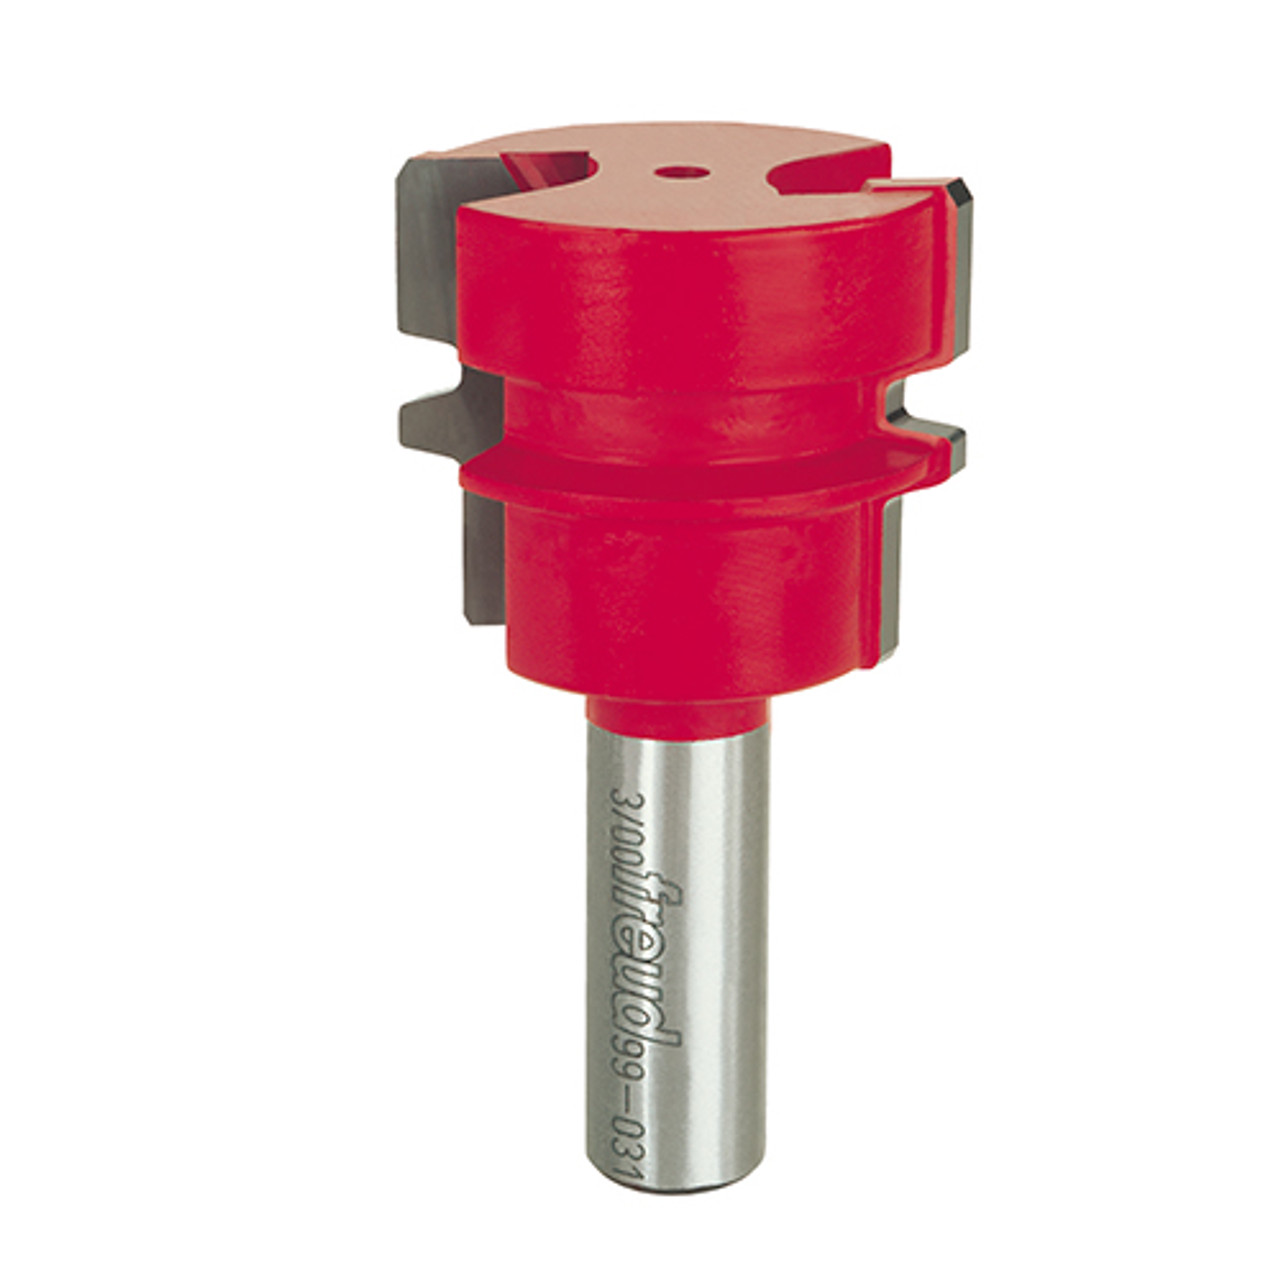 Freud Reversible Glue Joint Bit, 1-1/2" Overall Diameter, 1-1/4" Carbide Height, 2-3/4" Overall Length, 1/2" Shank